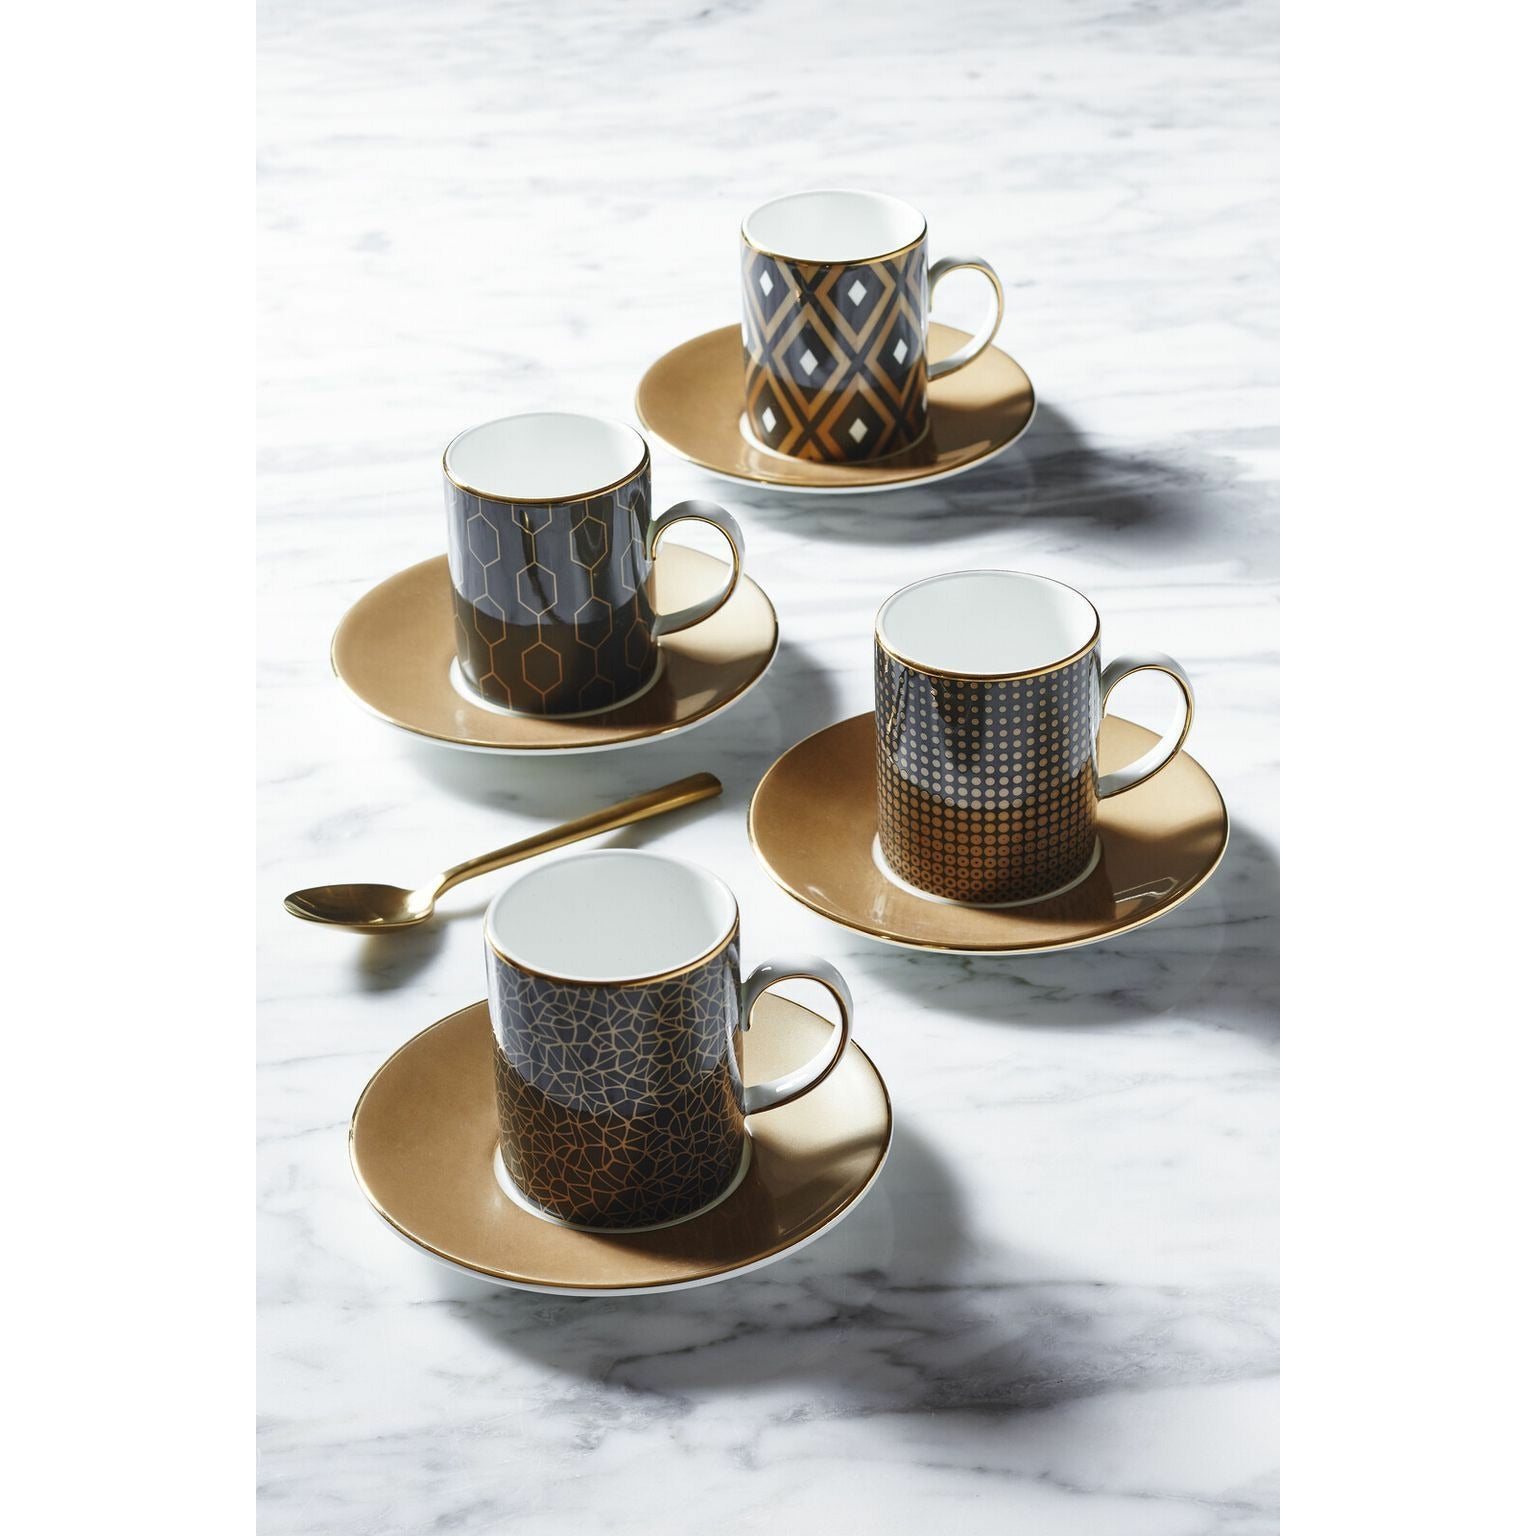 Wedgwood Arris Espresso Cup And Saucer Set 4pcs Gift Box